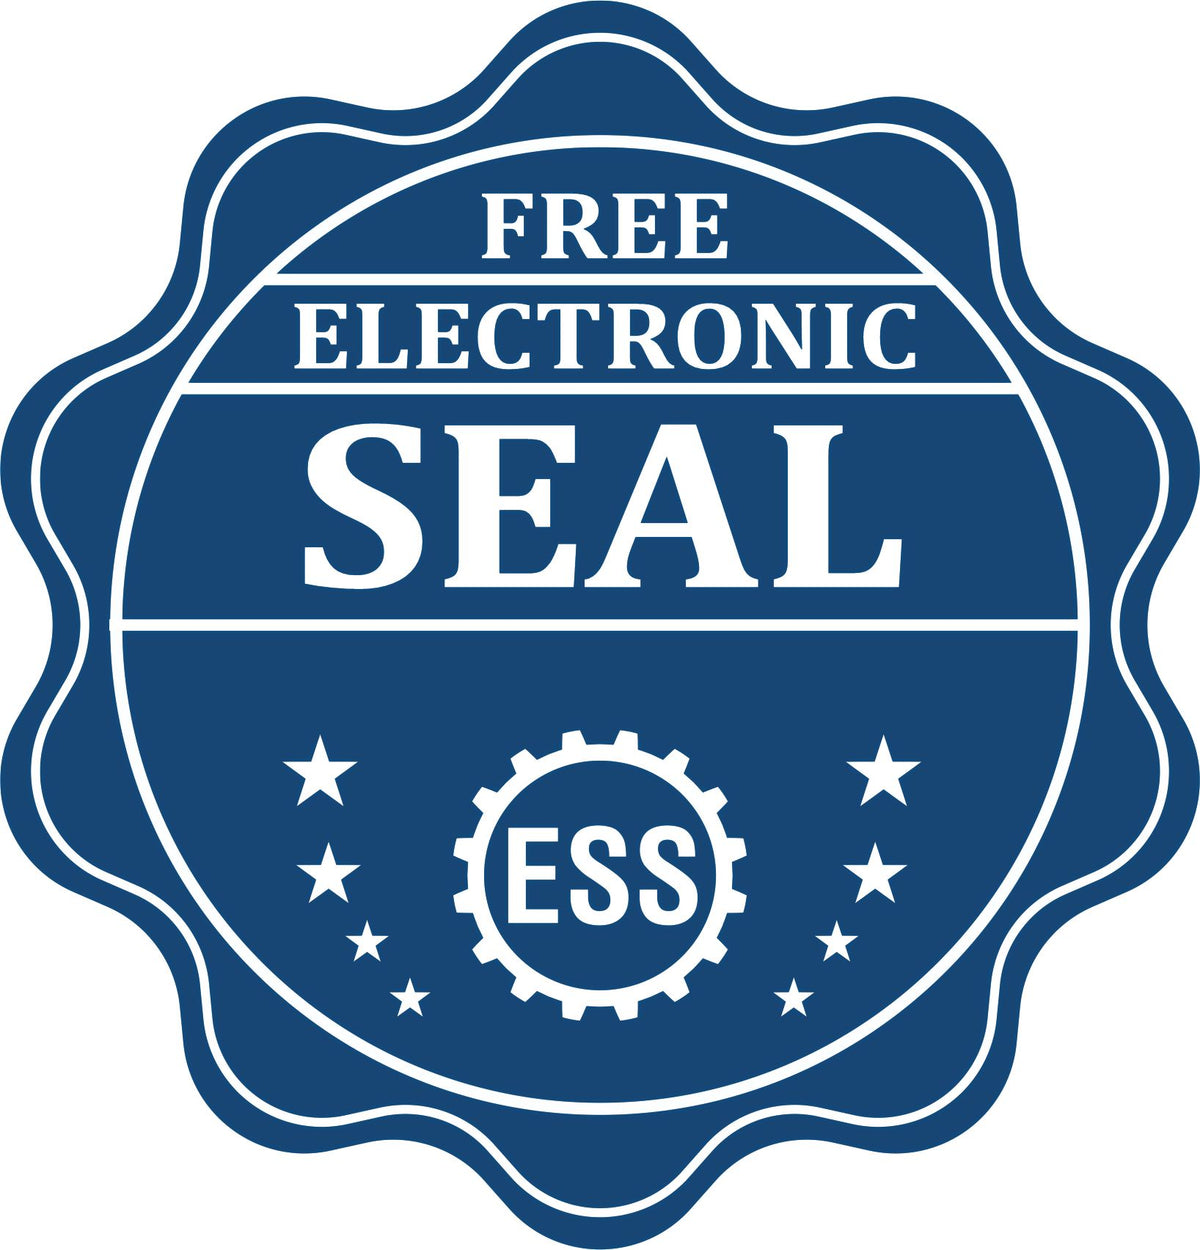 A badge showing a free electronic seal for the Long Reach Massachusetts Geology Seal with stars and the ESS gear on the emblem.